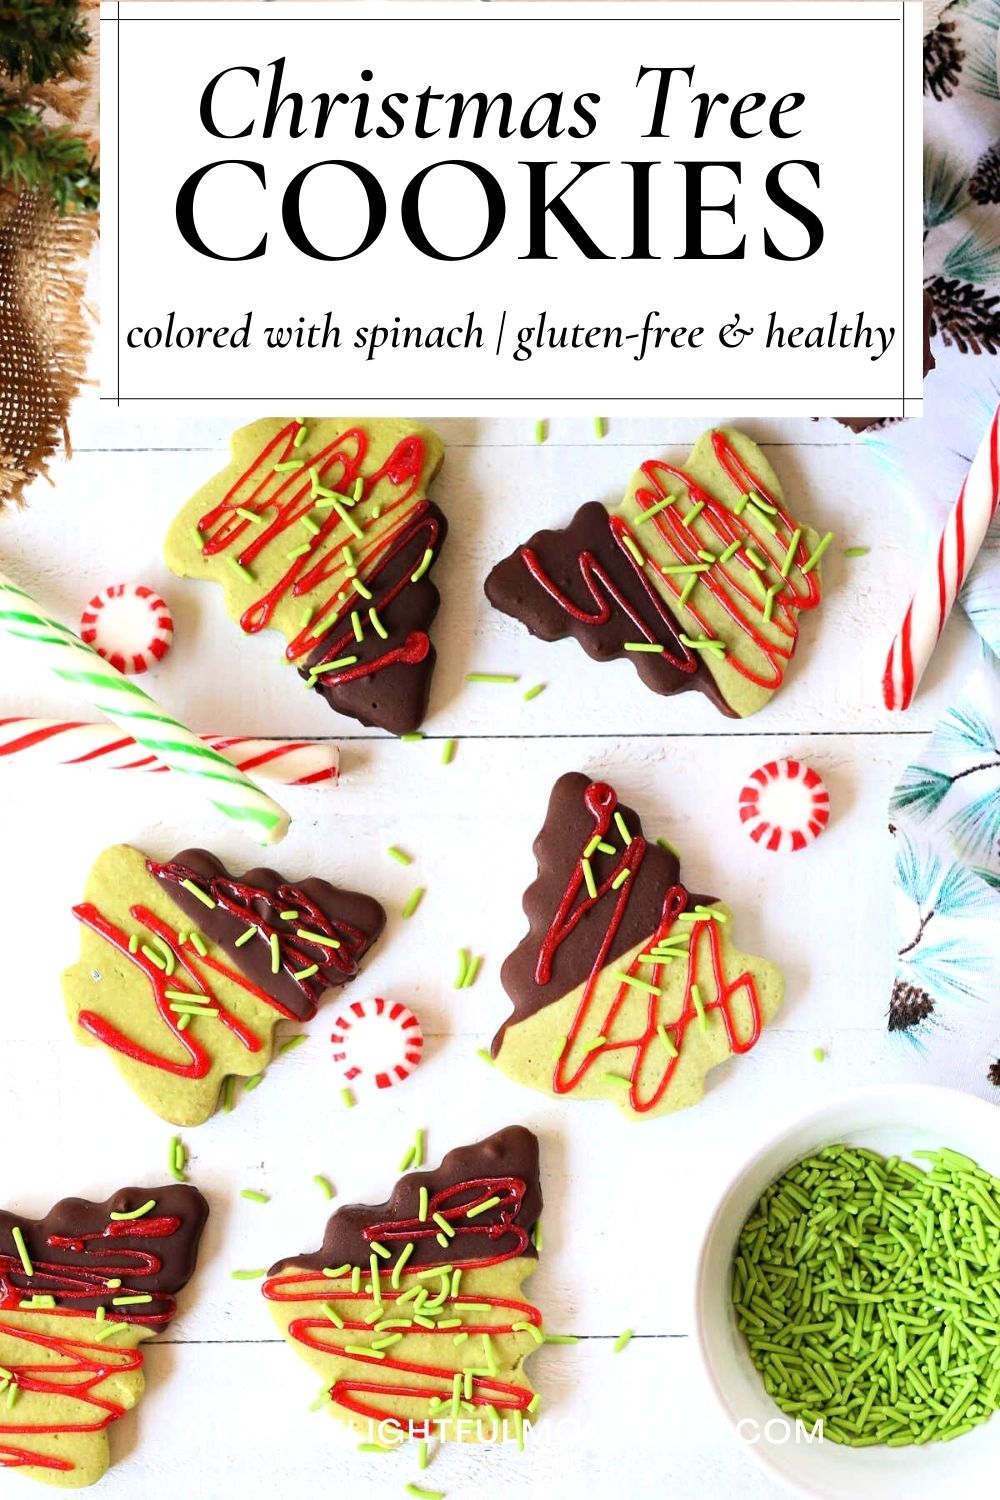 You will want to makea double batch of these vegan and gluten free Christmas sugar cookies because they are quick to prepare and won't last long in a large crowd! Colored with spinach, they are a favorite healthy holiday cookie recipe! 